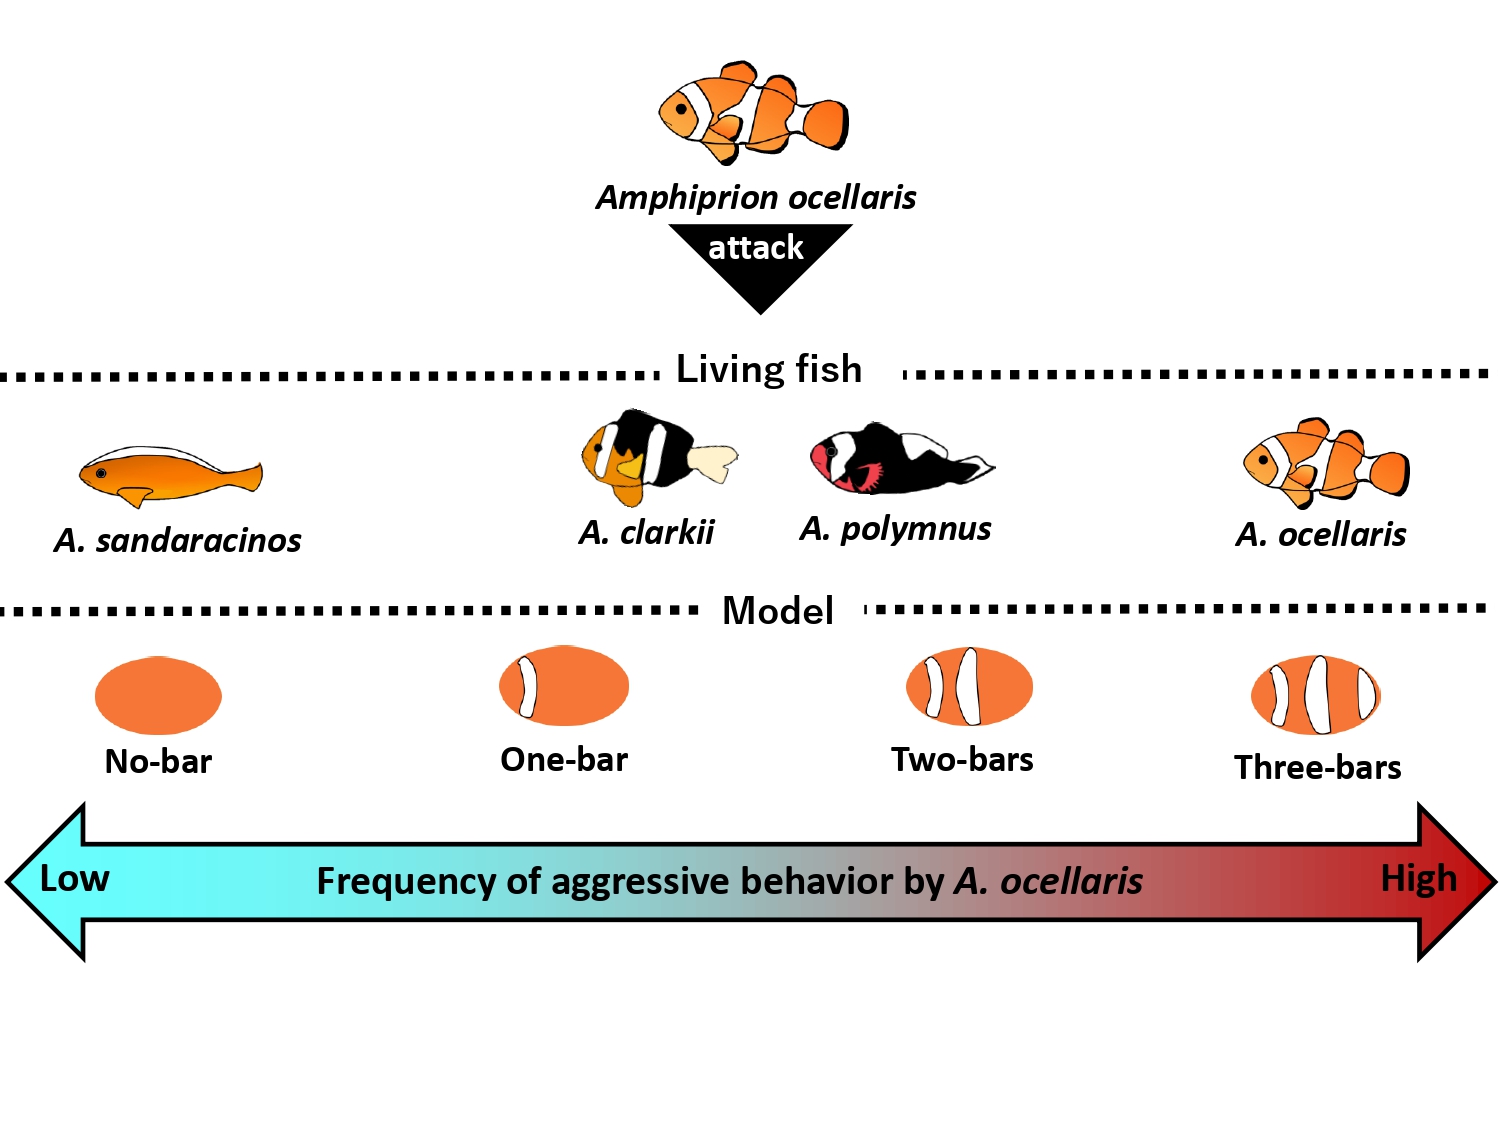 The aggressive behavior of Amphiprion ocellaris, in response to different species of anemonefish, both live and in models. CREDIT: Kina Hayashi/Okinawa Institute of Science and Technology.
